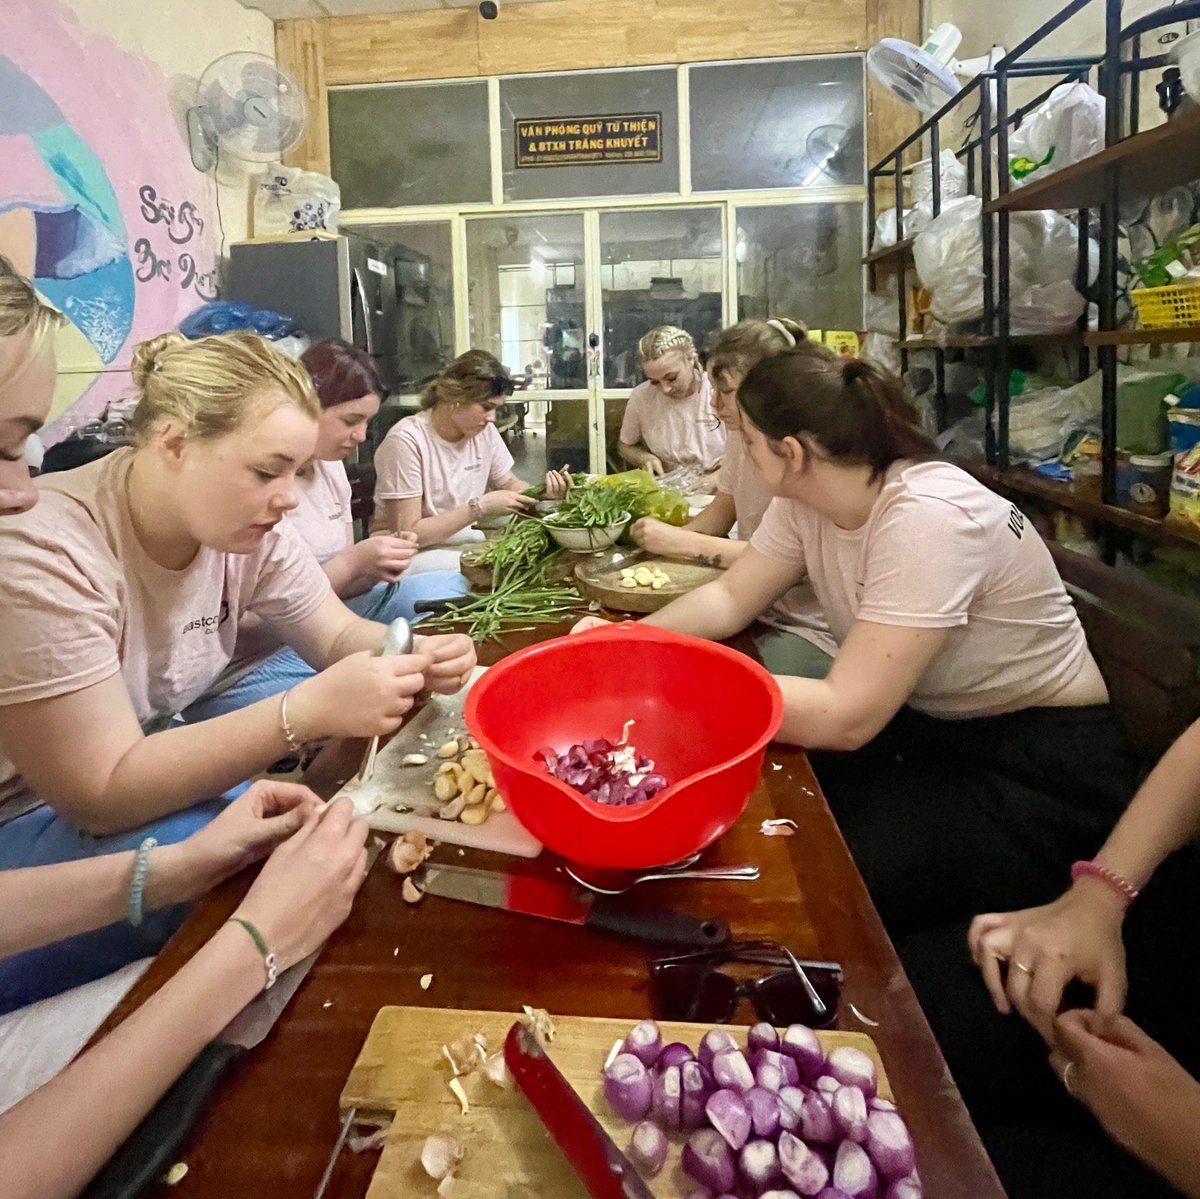 Our Travel and Tourism students spent another day in the soup kitchen, making grilled fish with bean sprouts, rice, vegetable soup, sweet dessert soup and a seaweed jelly! They prepared over 200 meals for the elderly homeless people and hospital patients. @TuringScheme_UK